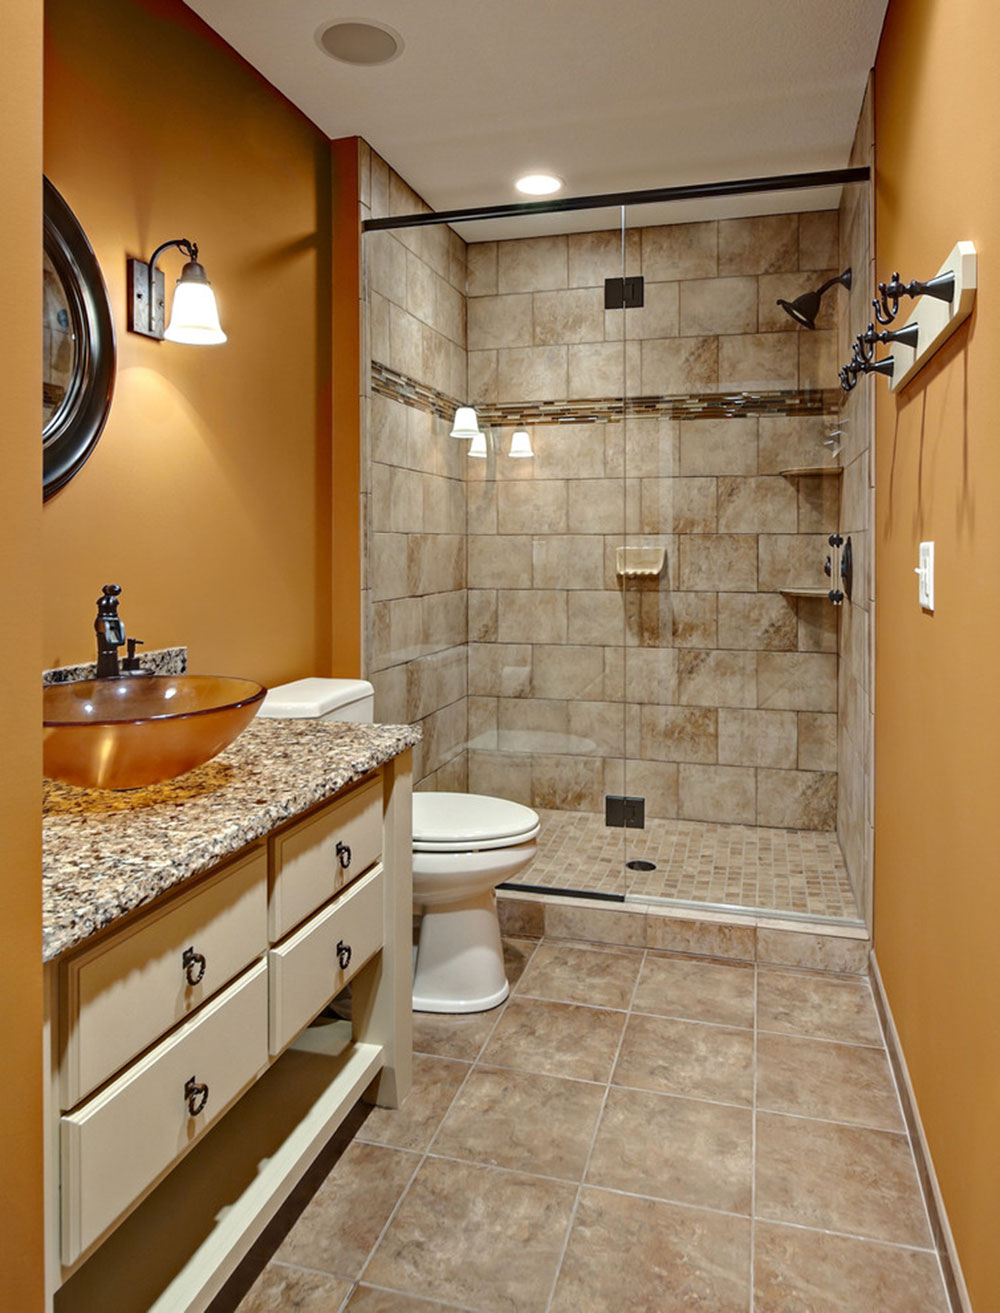 How Much Does It Cost To Add A Bathroom In The Basement Answered - Can You Put A Bathroom In Basement